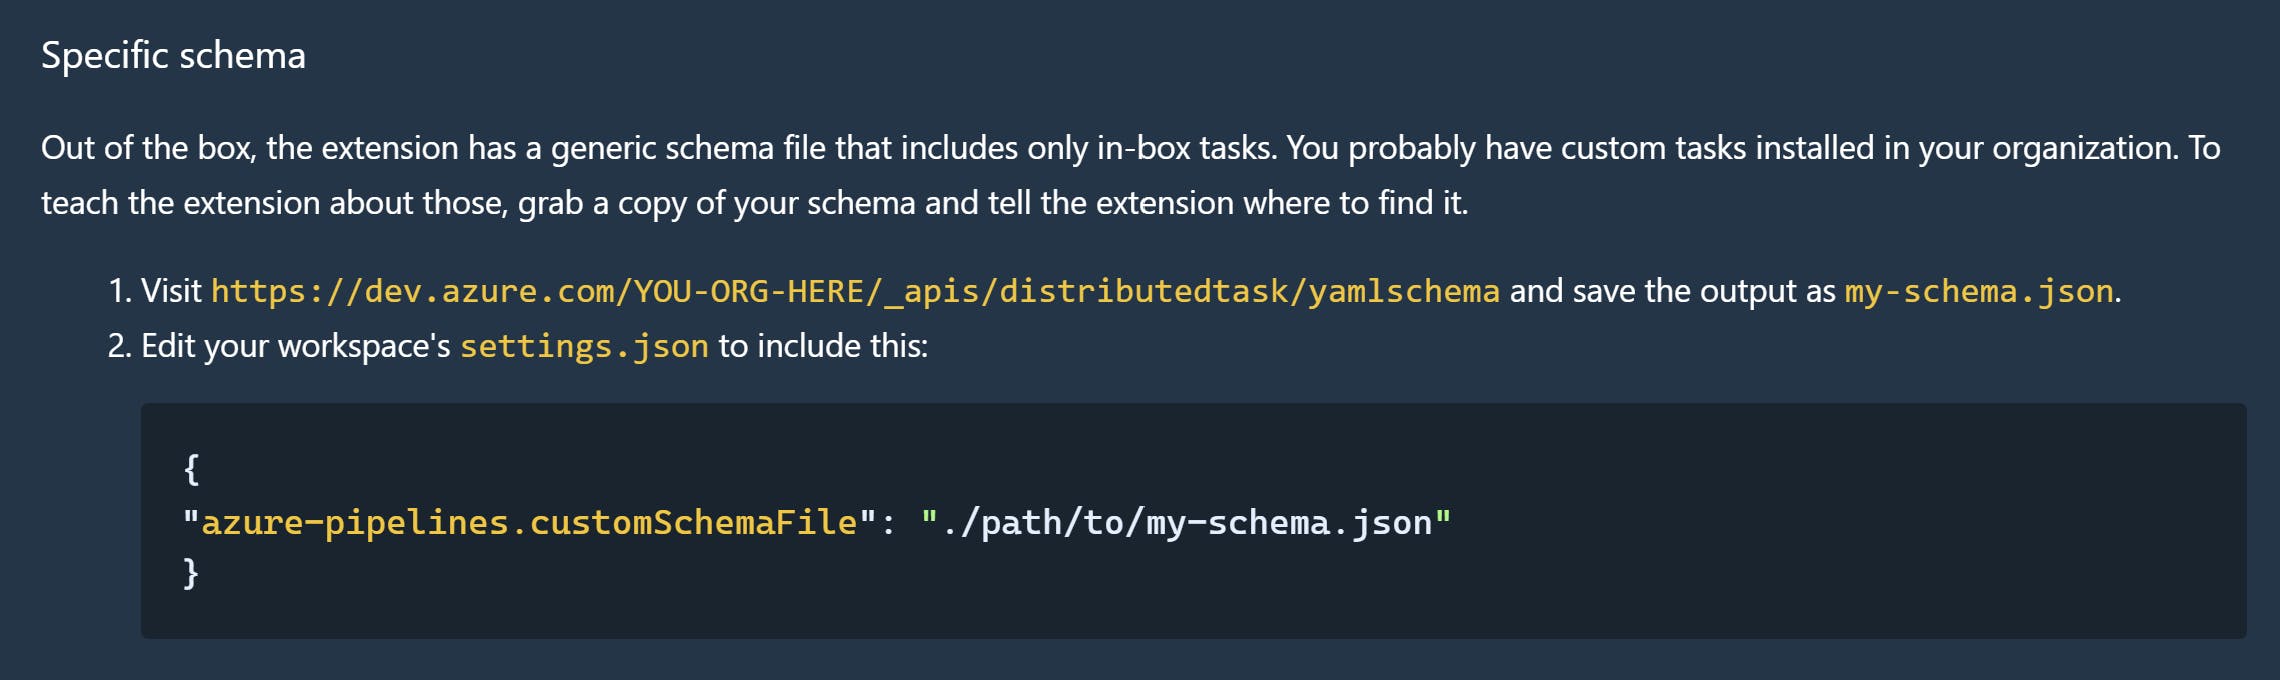 w092021tips_vscodeextension_1.png